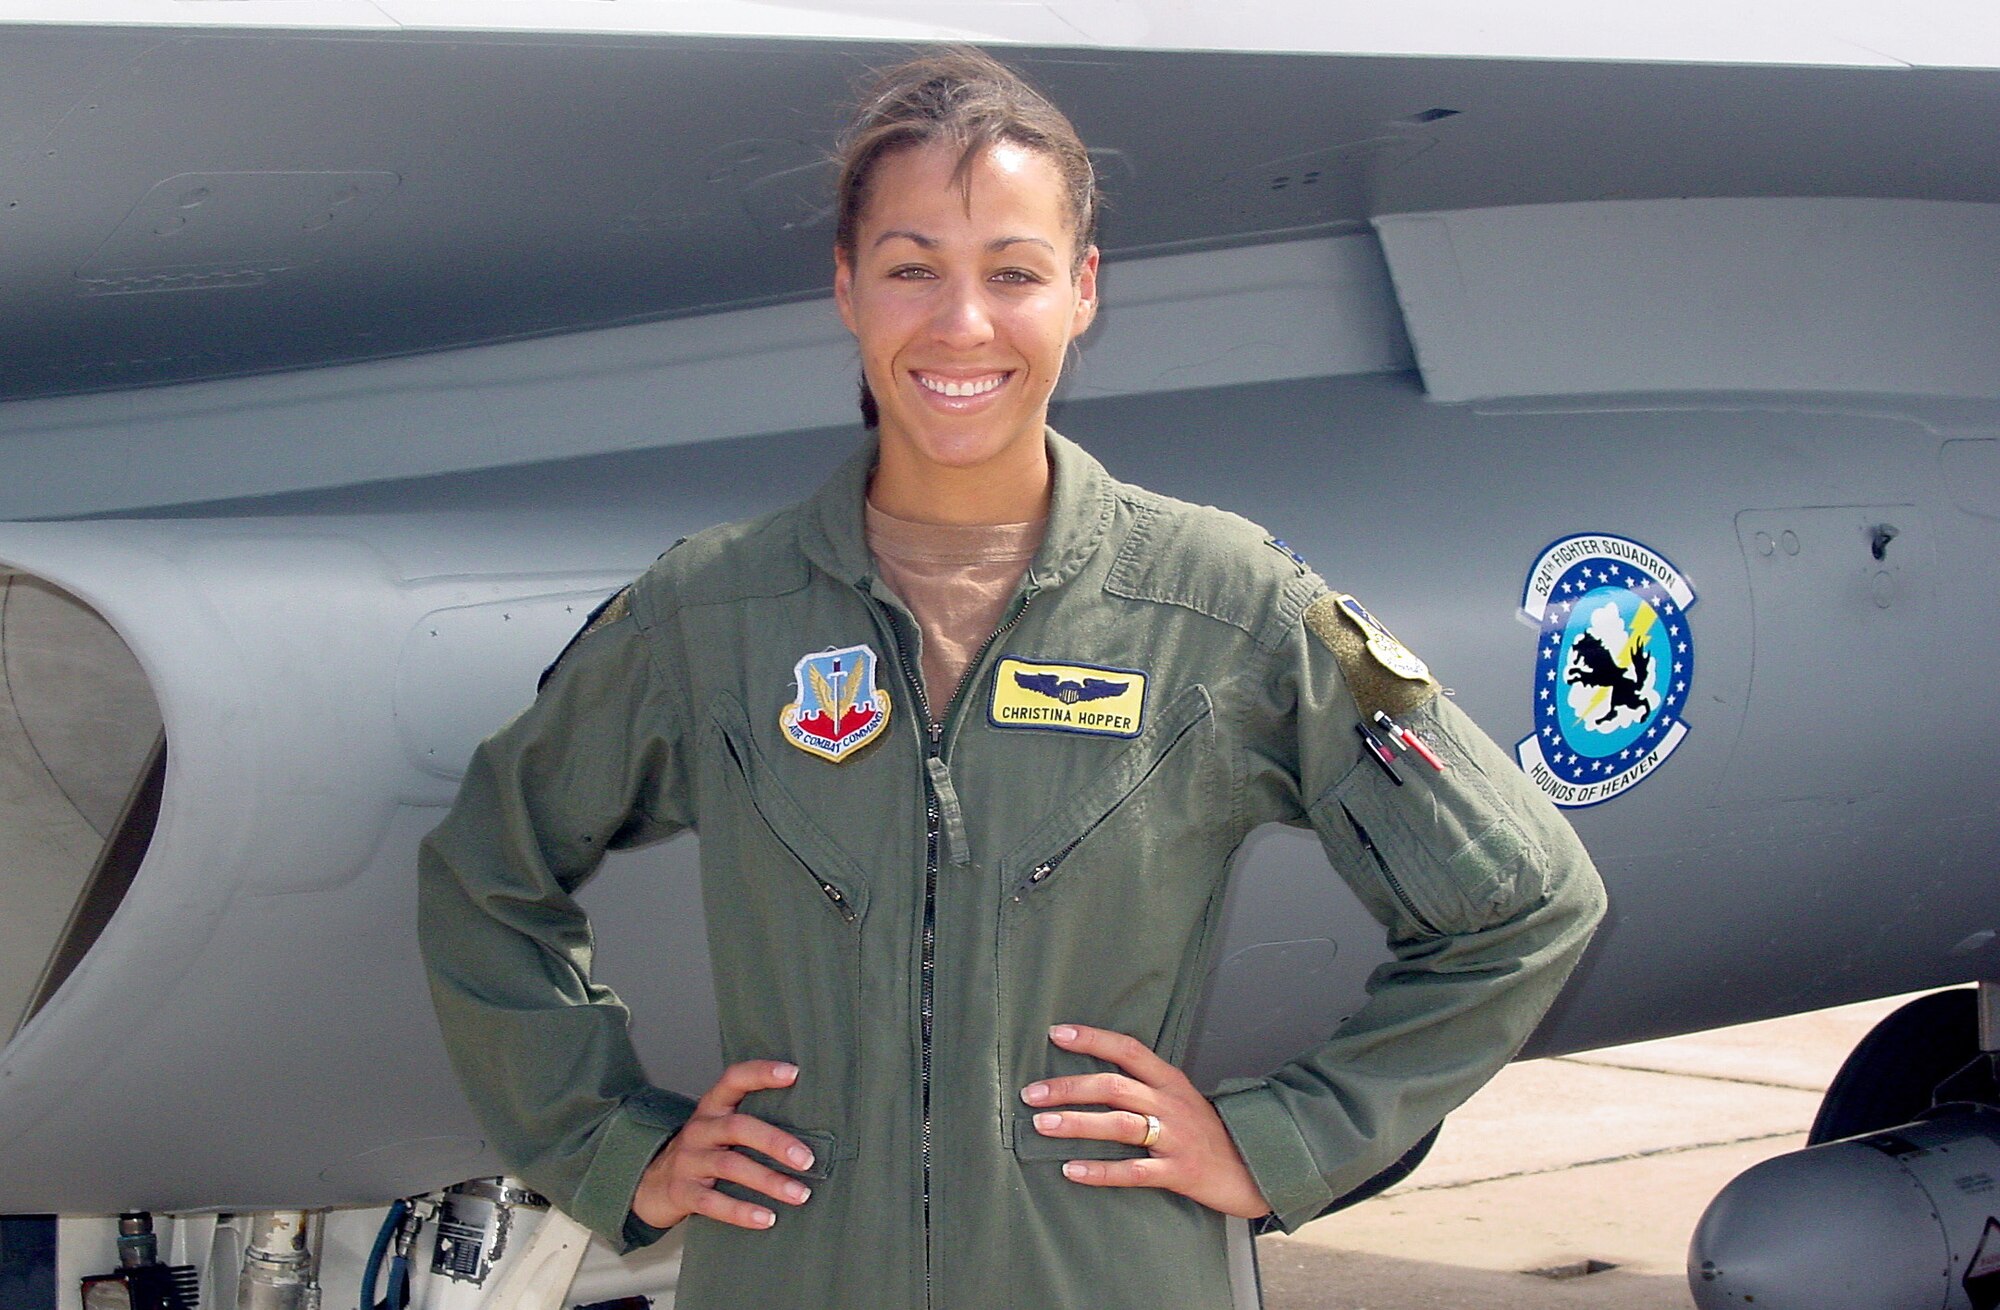 CANNON AIR FORCE BASE, N.M. -- Capt. Christina Hopper poses in front of an F-16 Fighting Falcon here.  She won Good Housekeeping magazine's Woman in Government Award for 2003 and will be featured in the magazine's July edition.  Captain Hopper is a pilot assigned to the 524th Fighter Squadron.  (U.S. Air Force photo by Airman 1st Class Dawn Kirton)